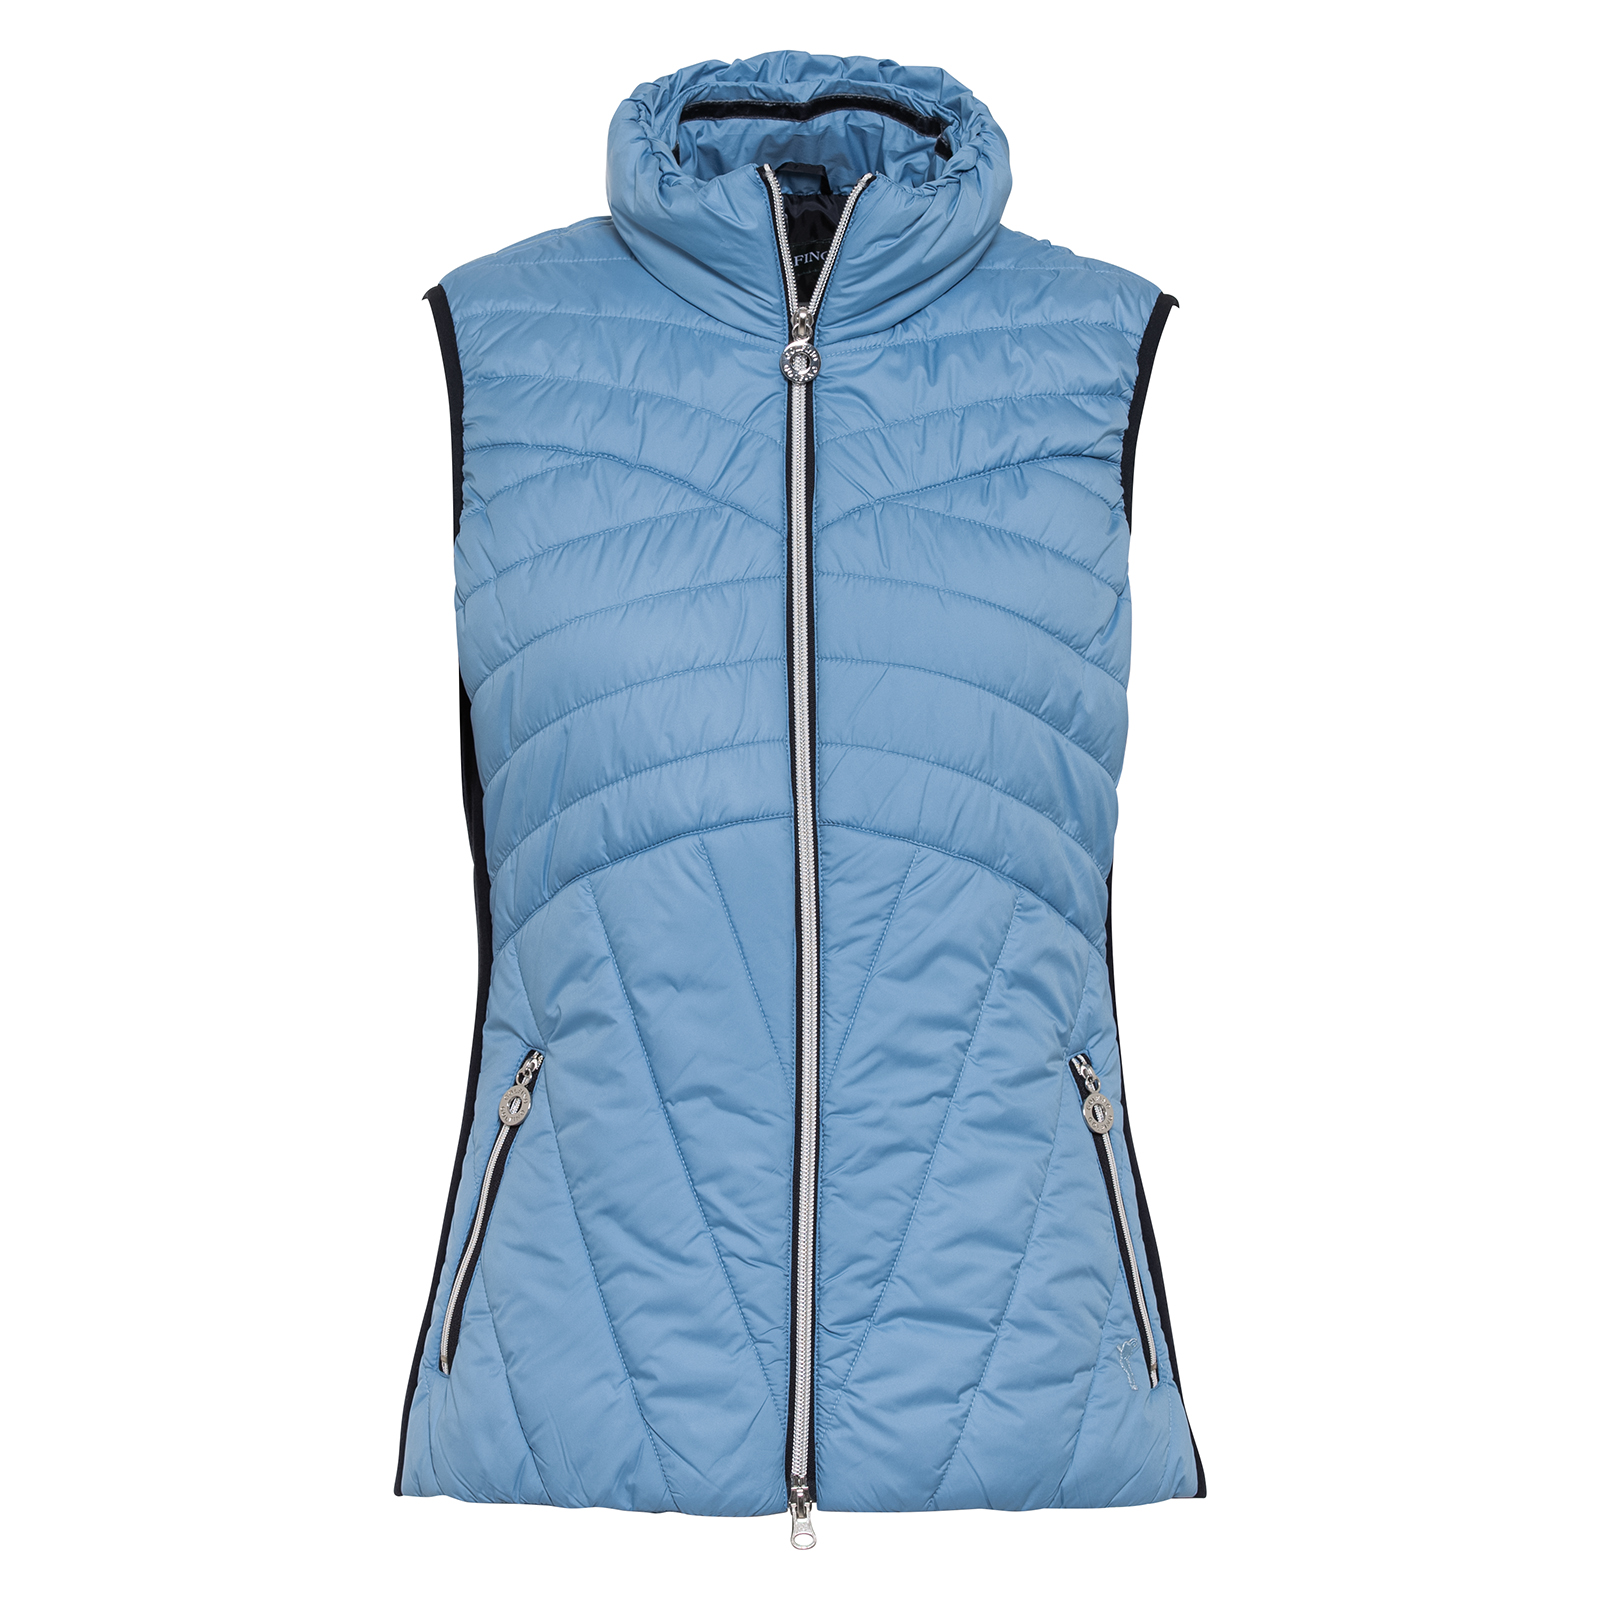 Ladies’ windproof golf waistcoat in quilted padded microfibre fabric